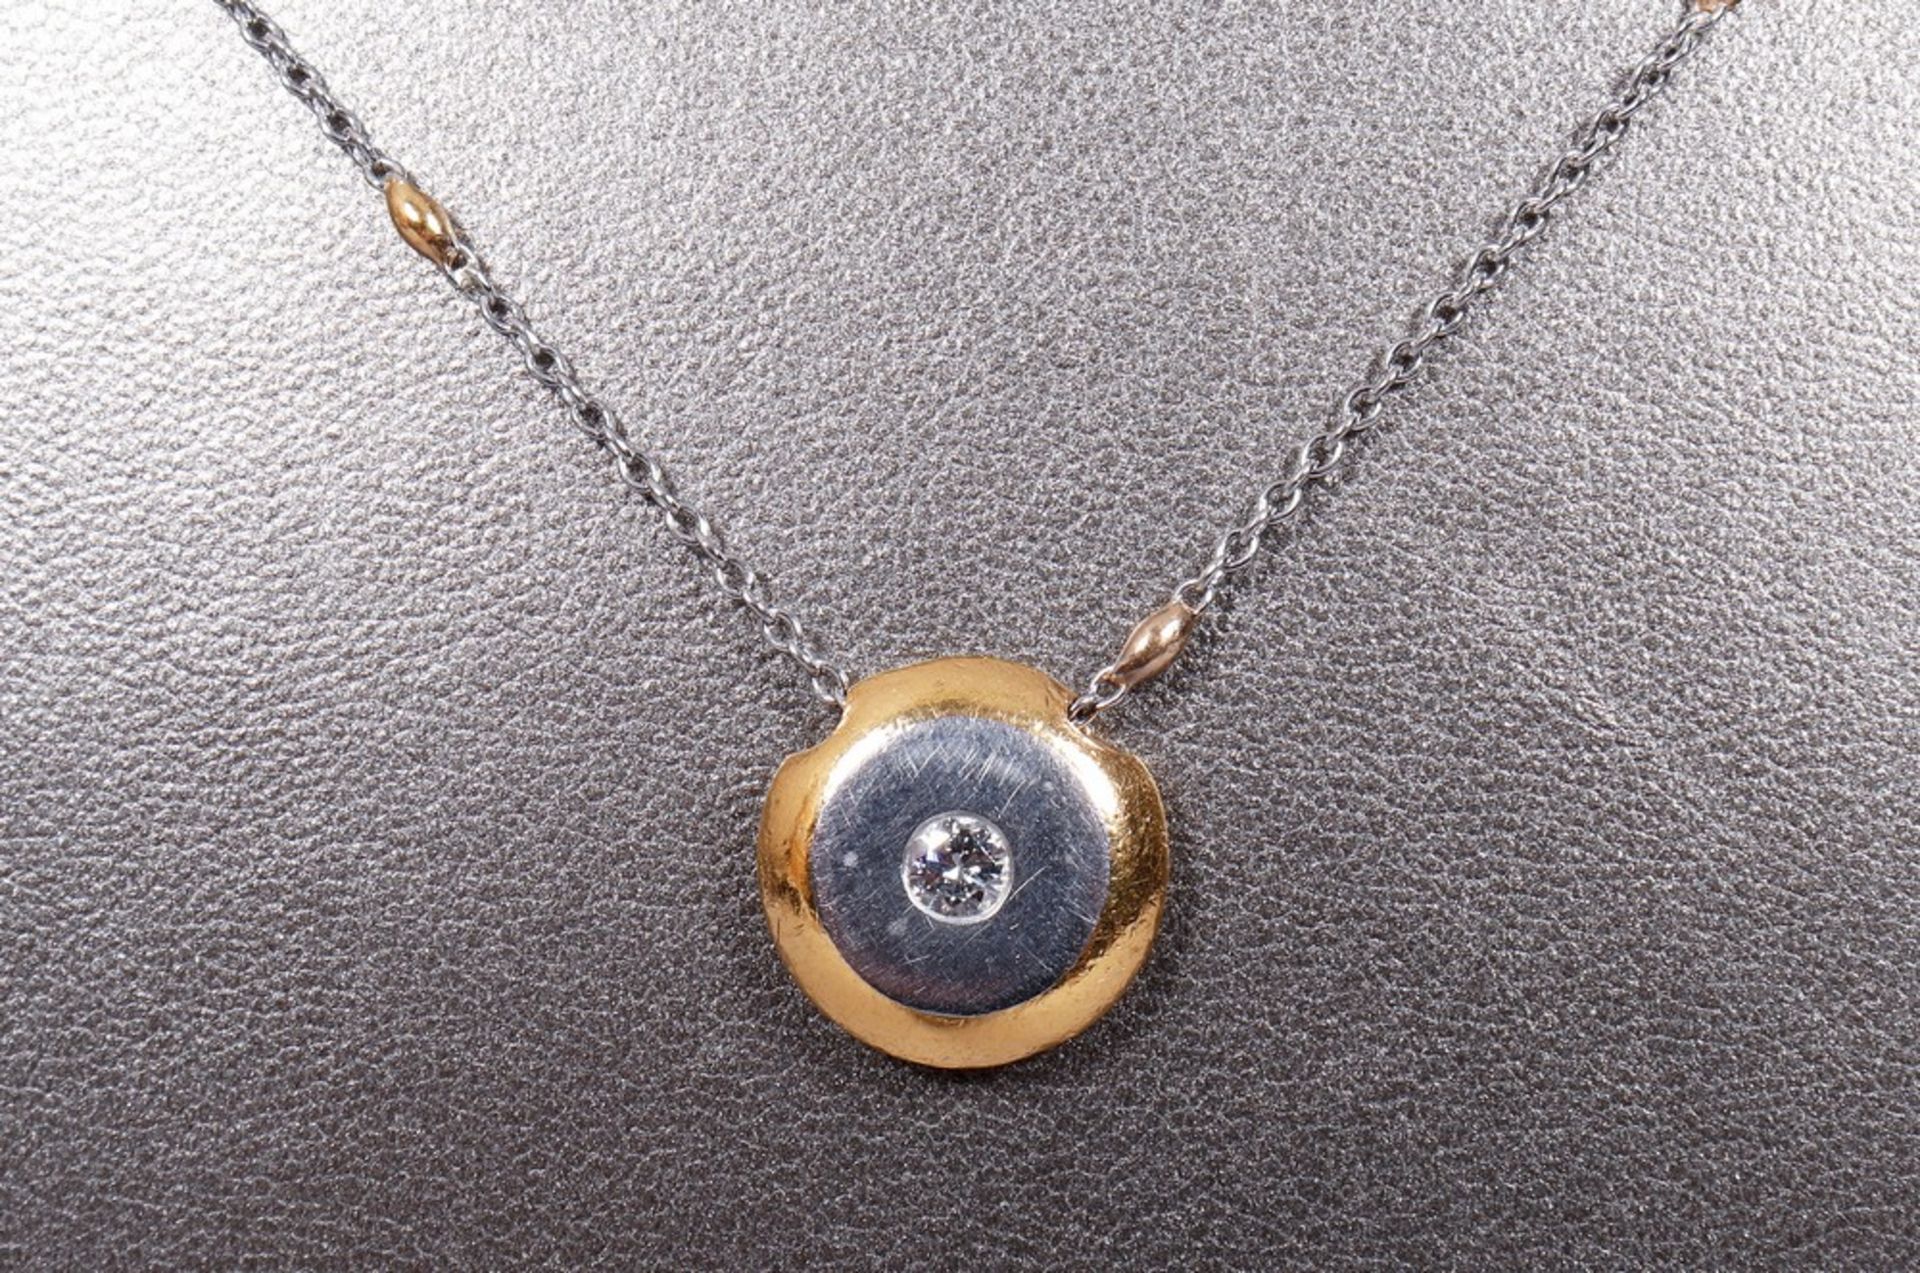 Necklace, pendant on chain, 950 platinum and fine gold, Niessing - Image 2 of 4